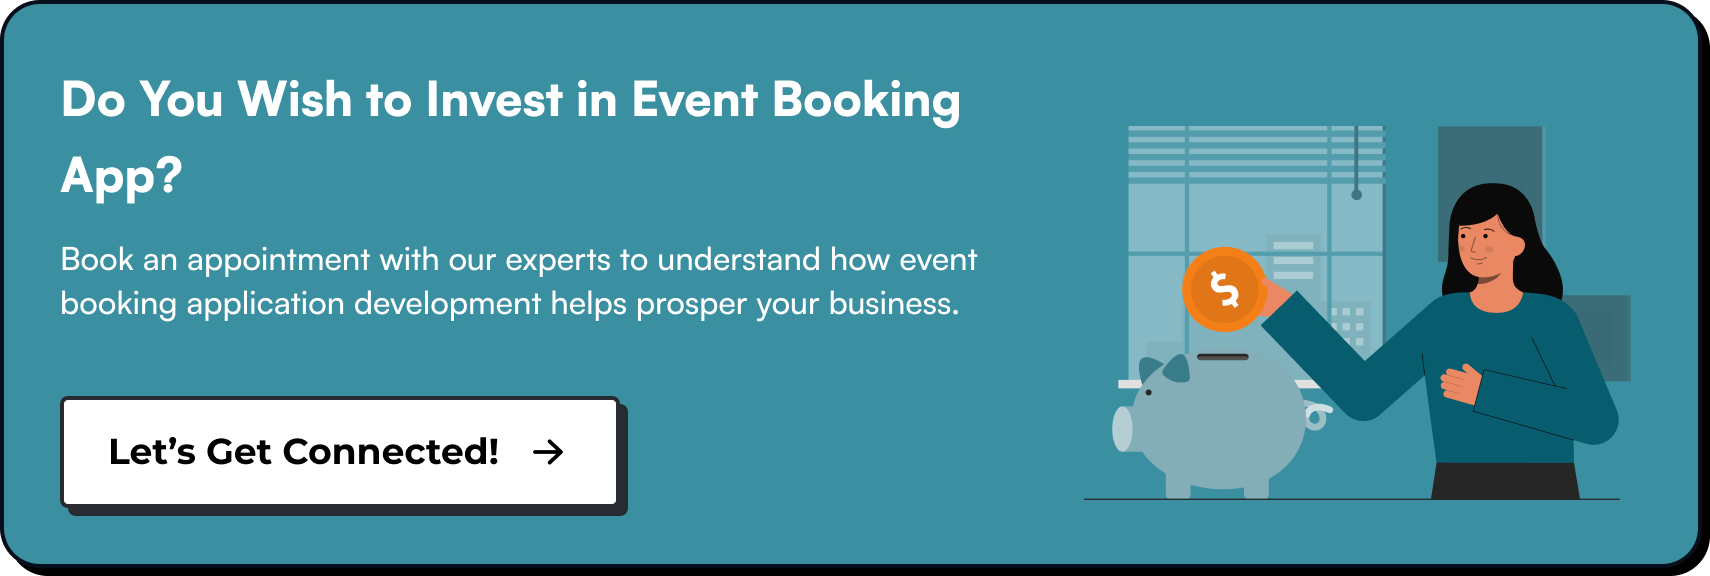 Do You Wish to Invest in for developing an Event Booking App